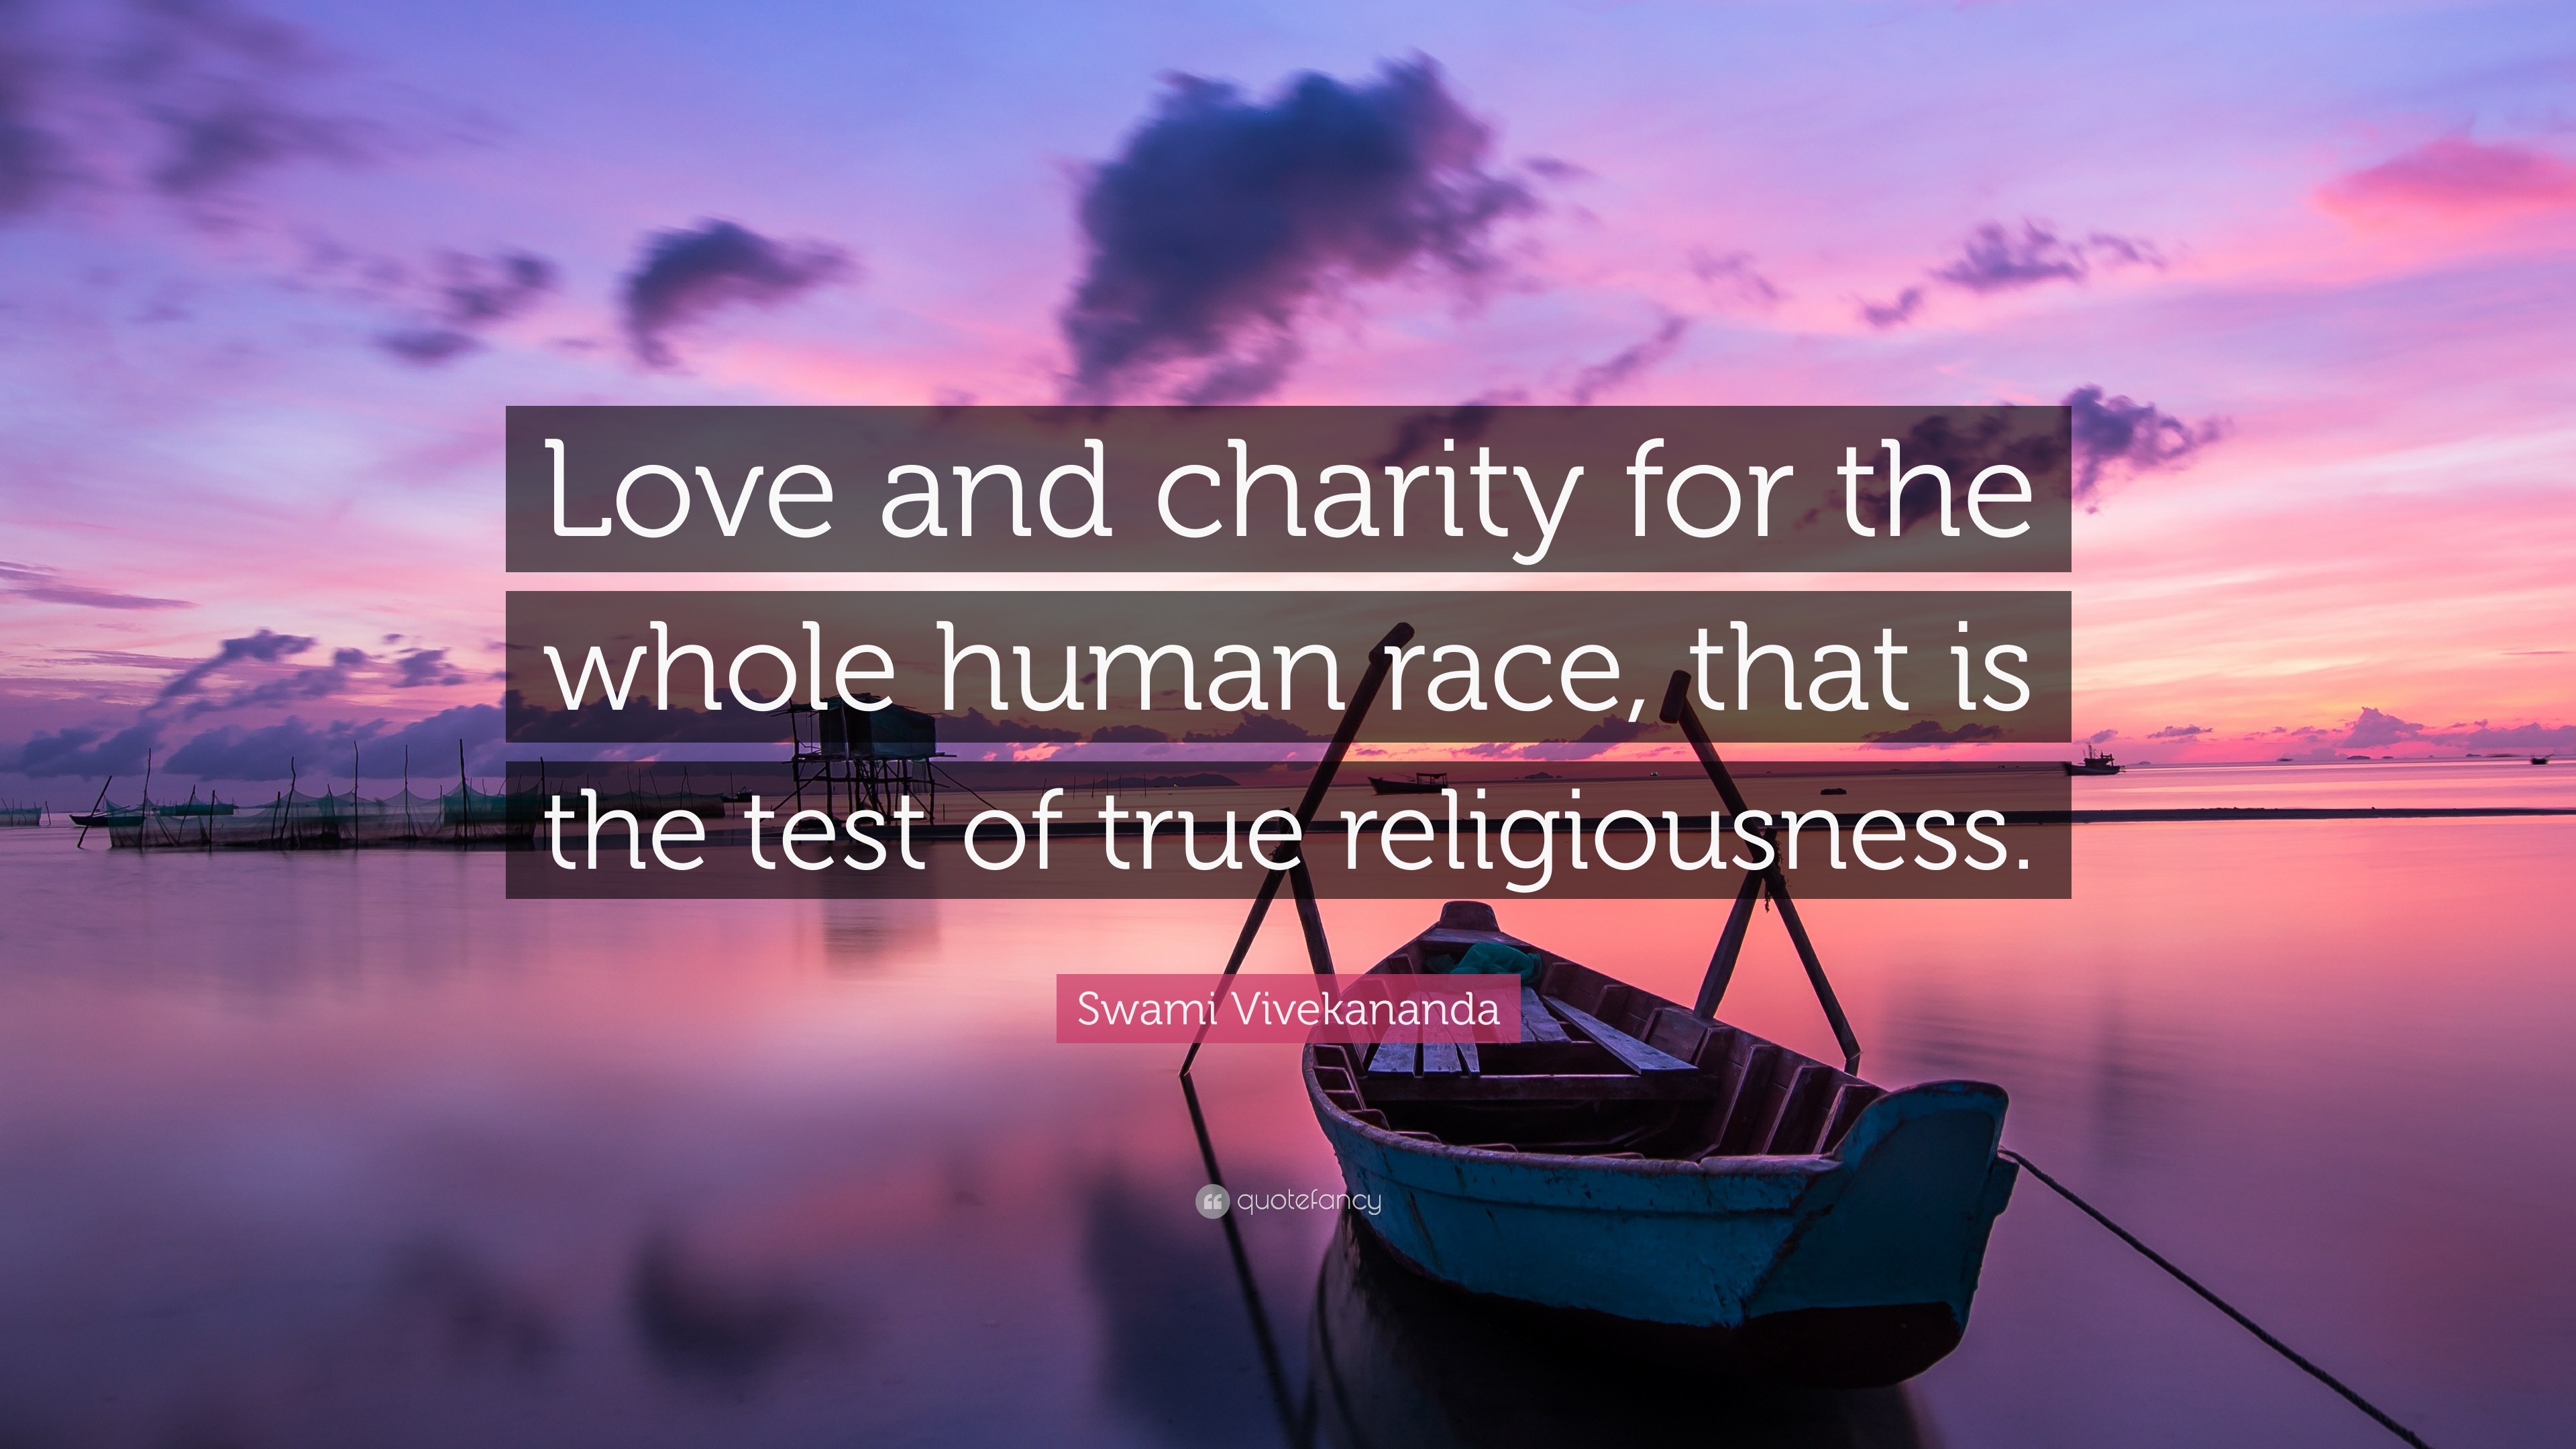 Swami Vivekananda Quote “Love and charity for the whole